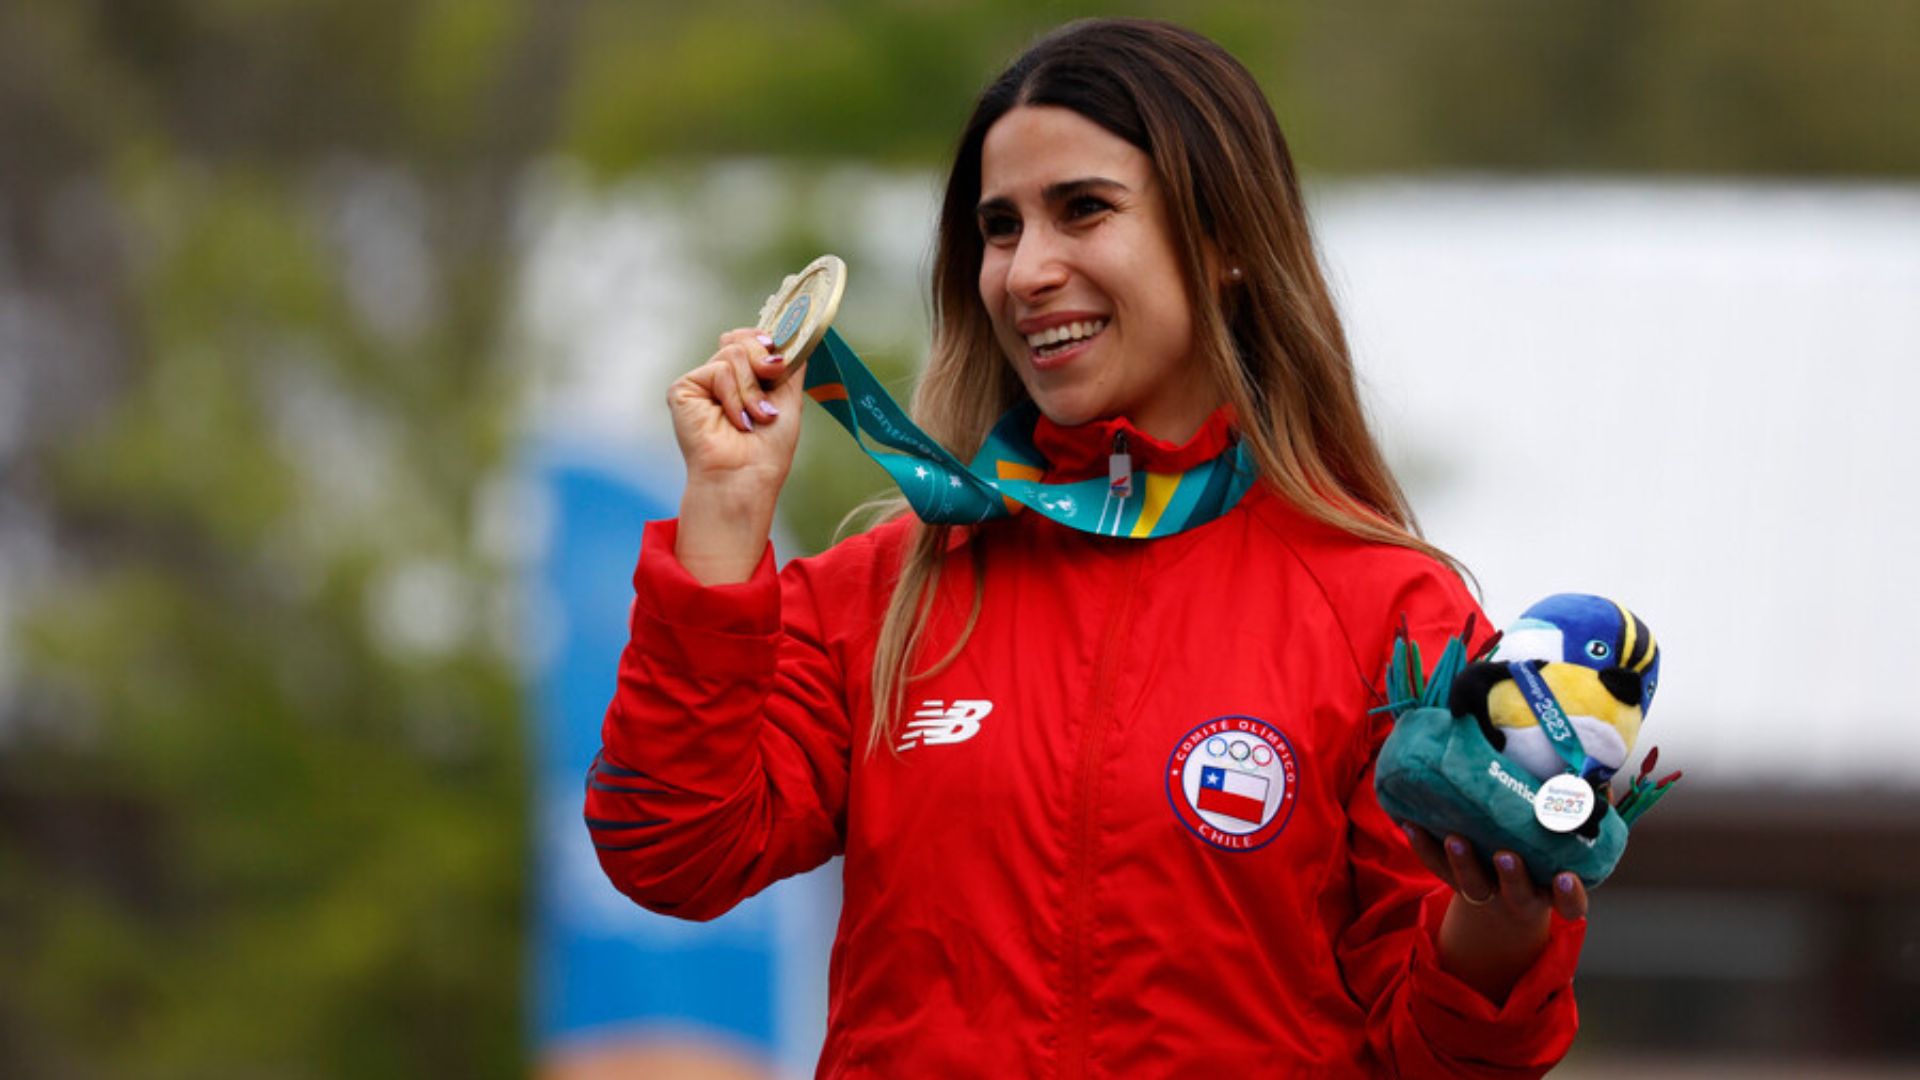 Summary: Crovetto wins first gold for Chile, amass four medals